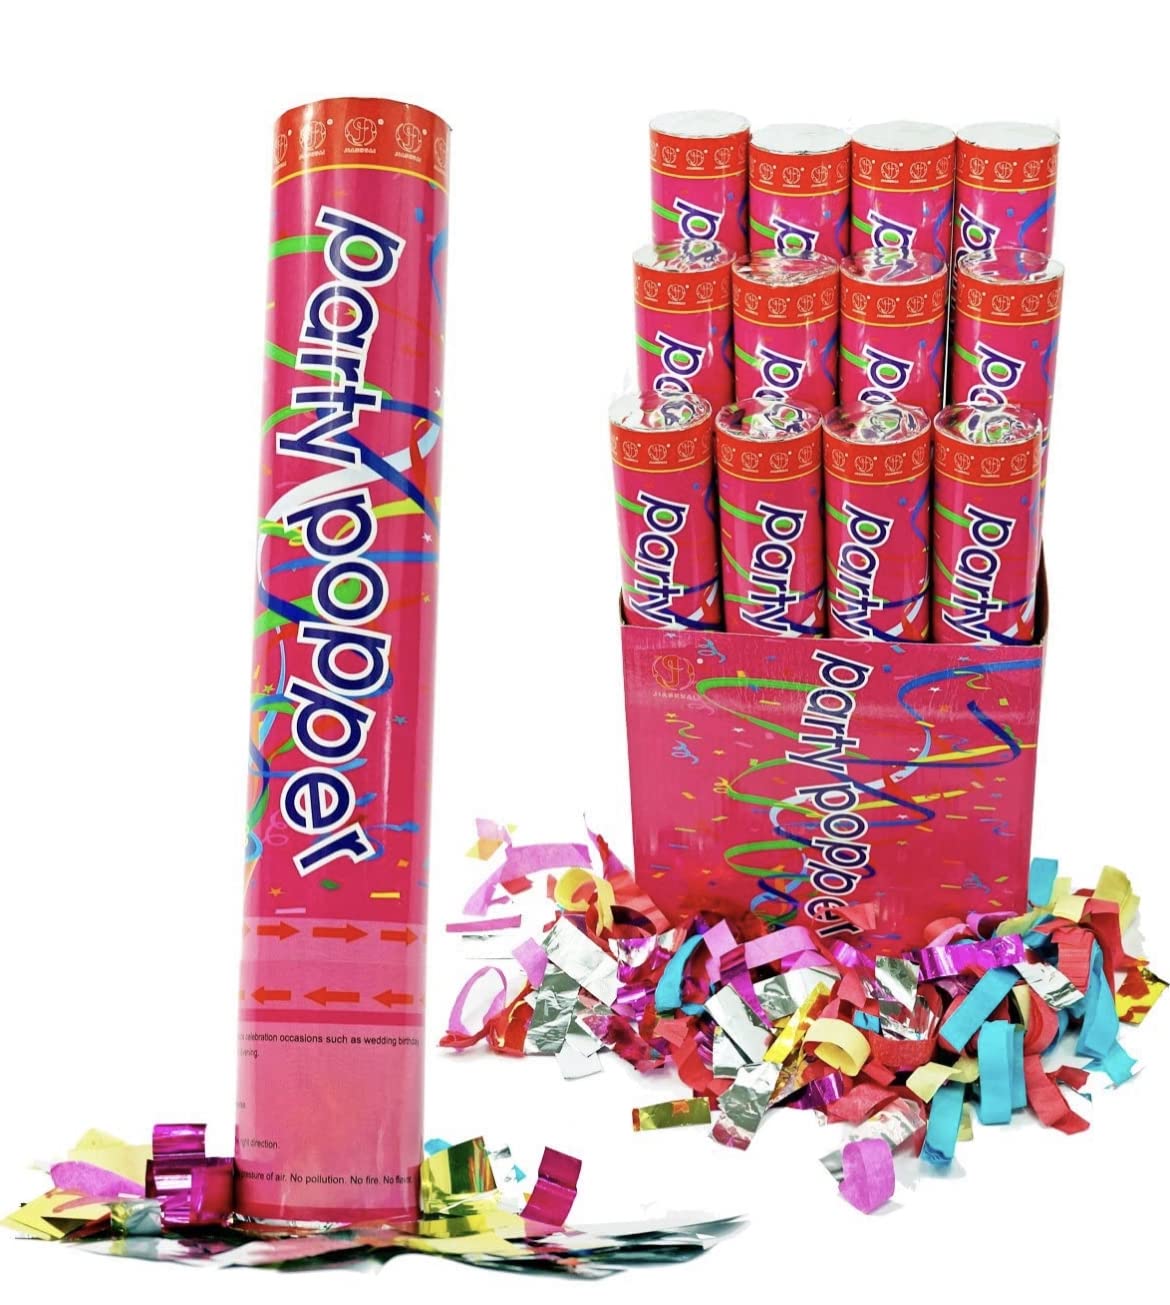 Confetti and party poppers